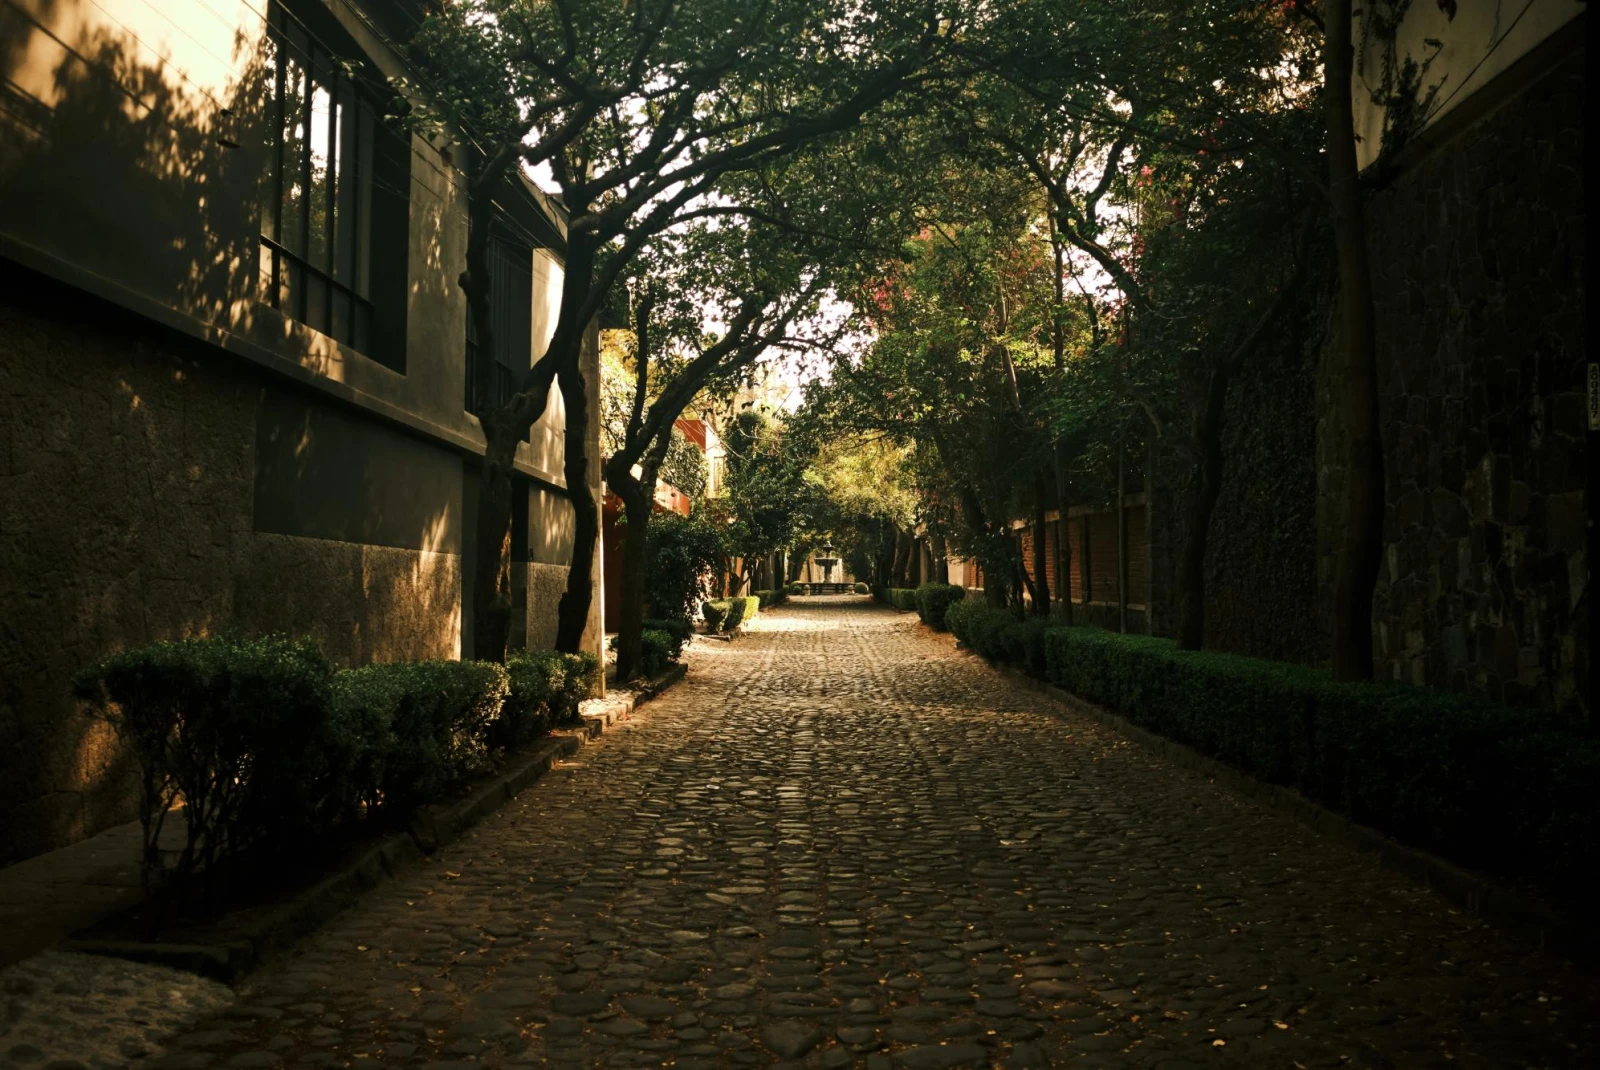 quite cobblestone street shaded by trees with with sun peaking through